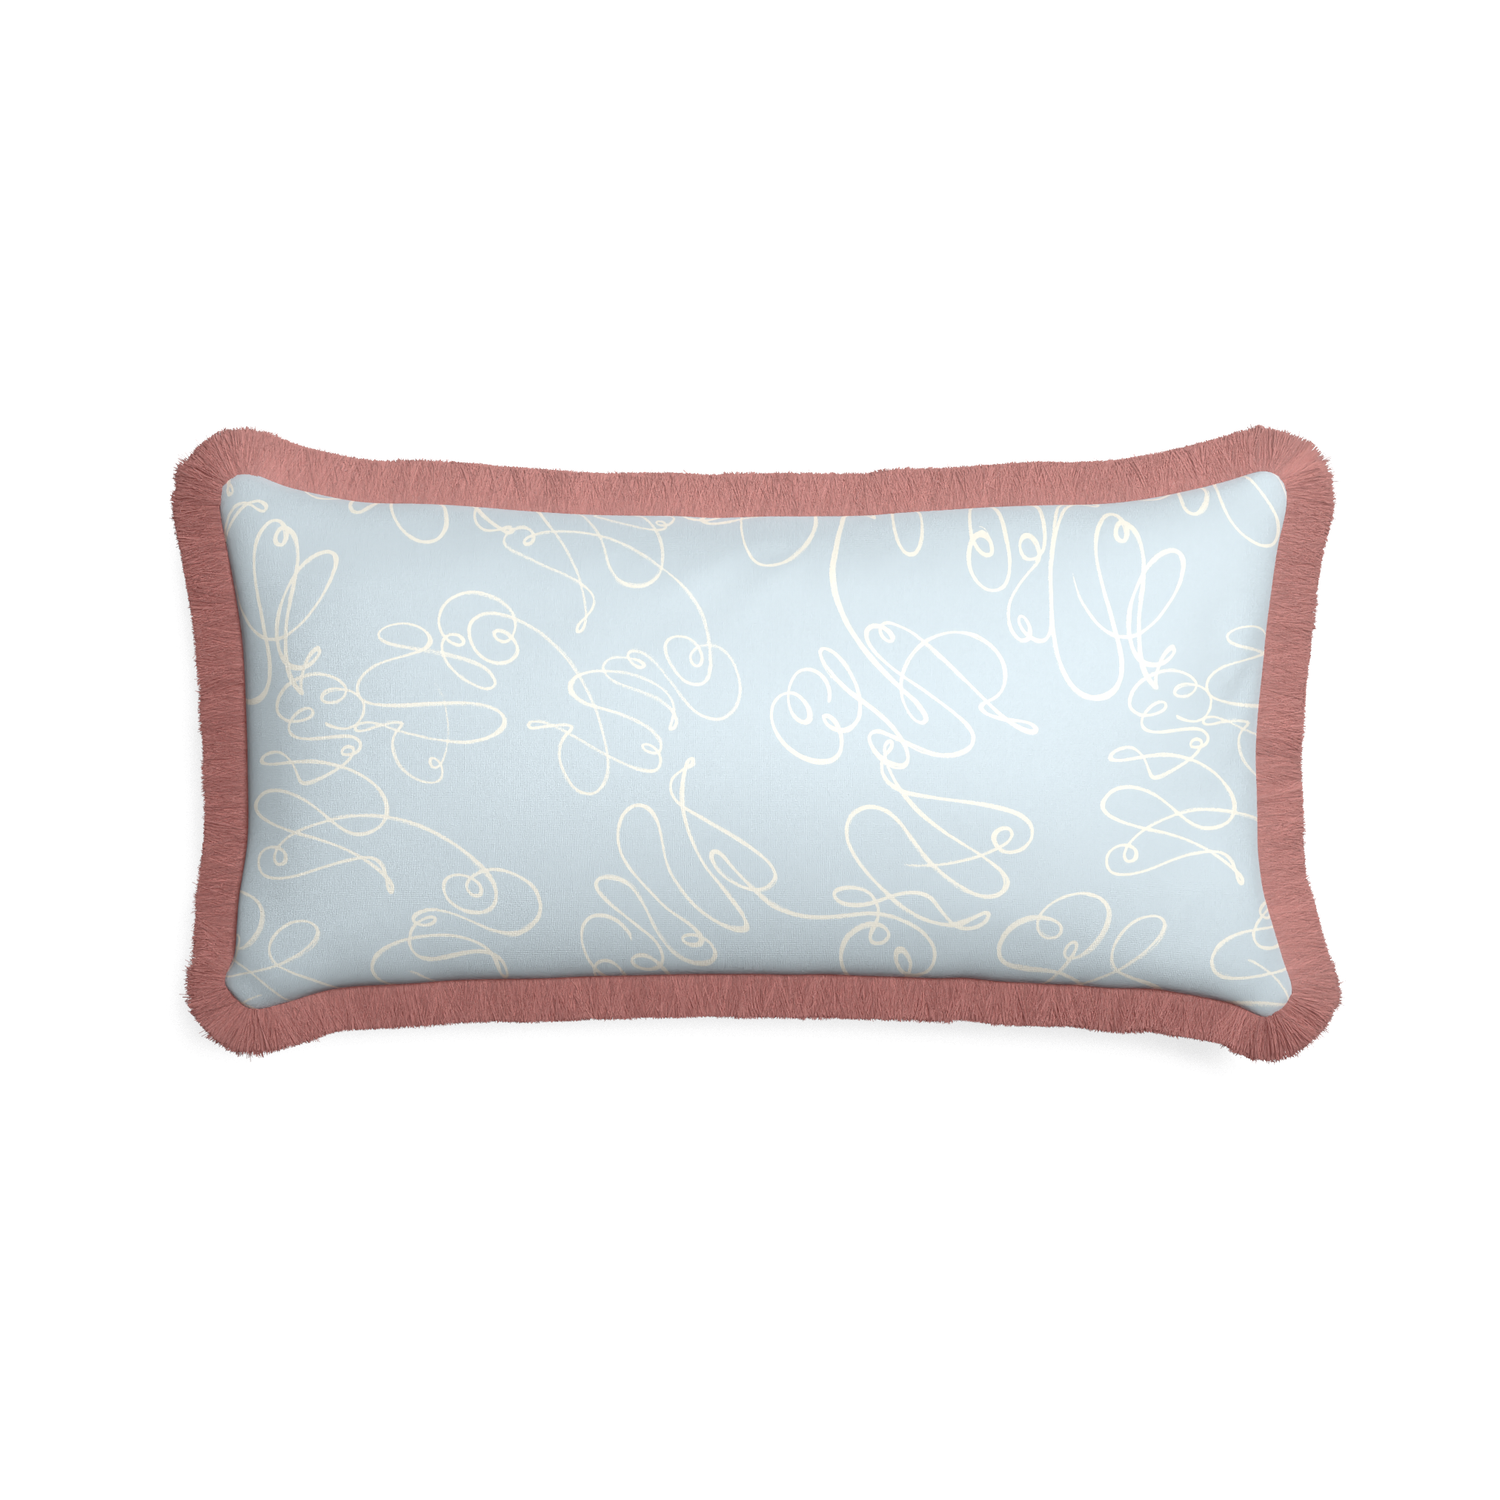 Midi-lumbar mirabella custom powder blue abstractpillow with d fringe on white background